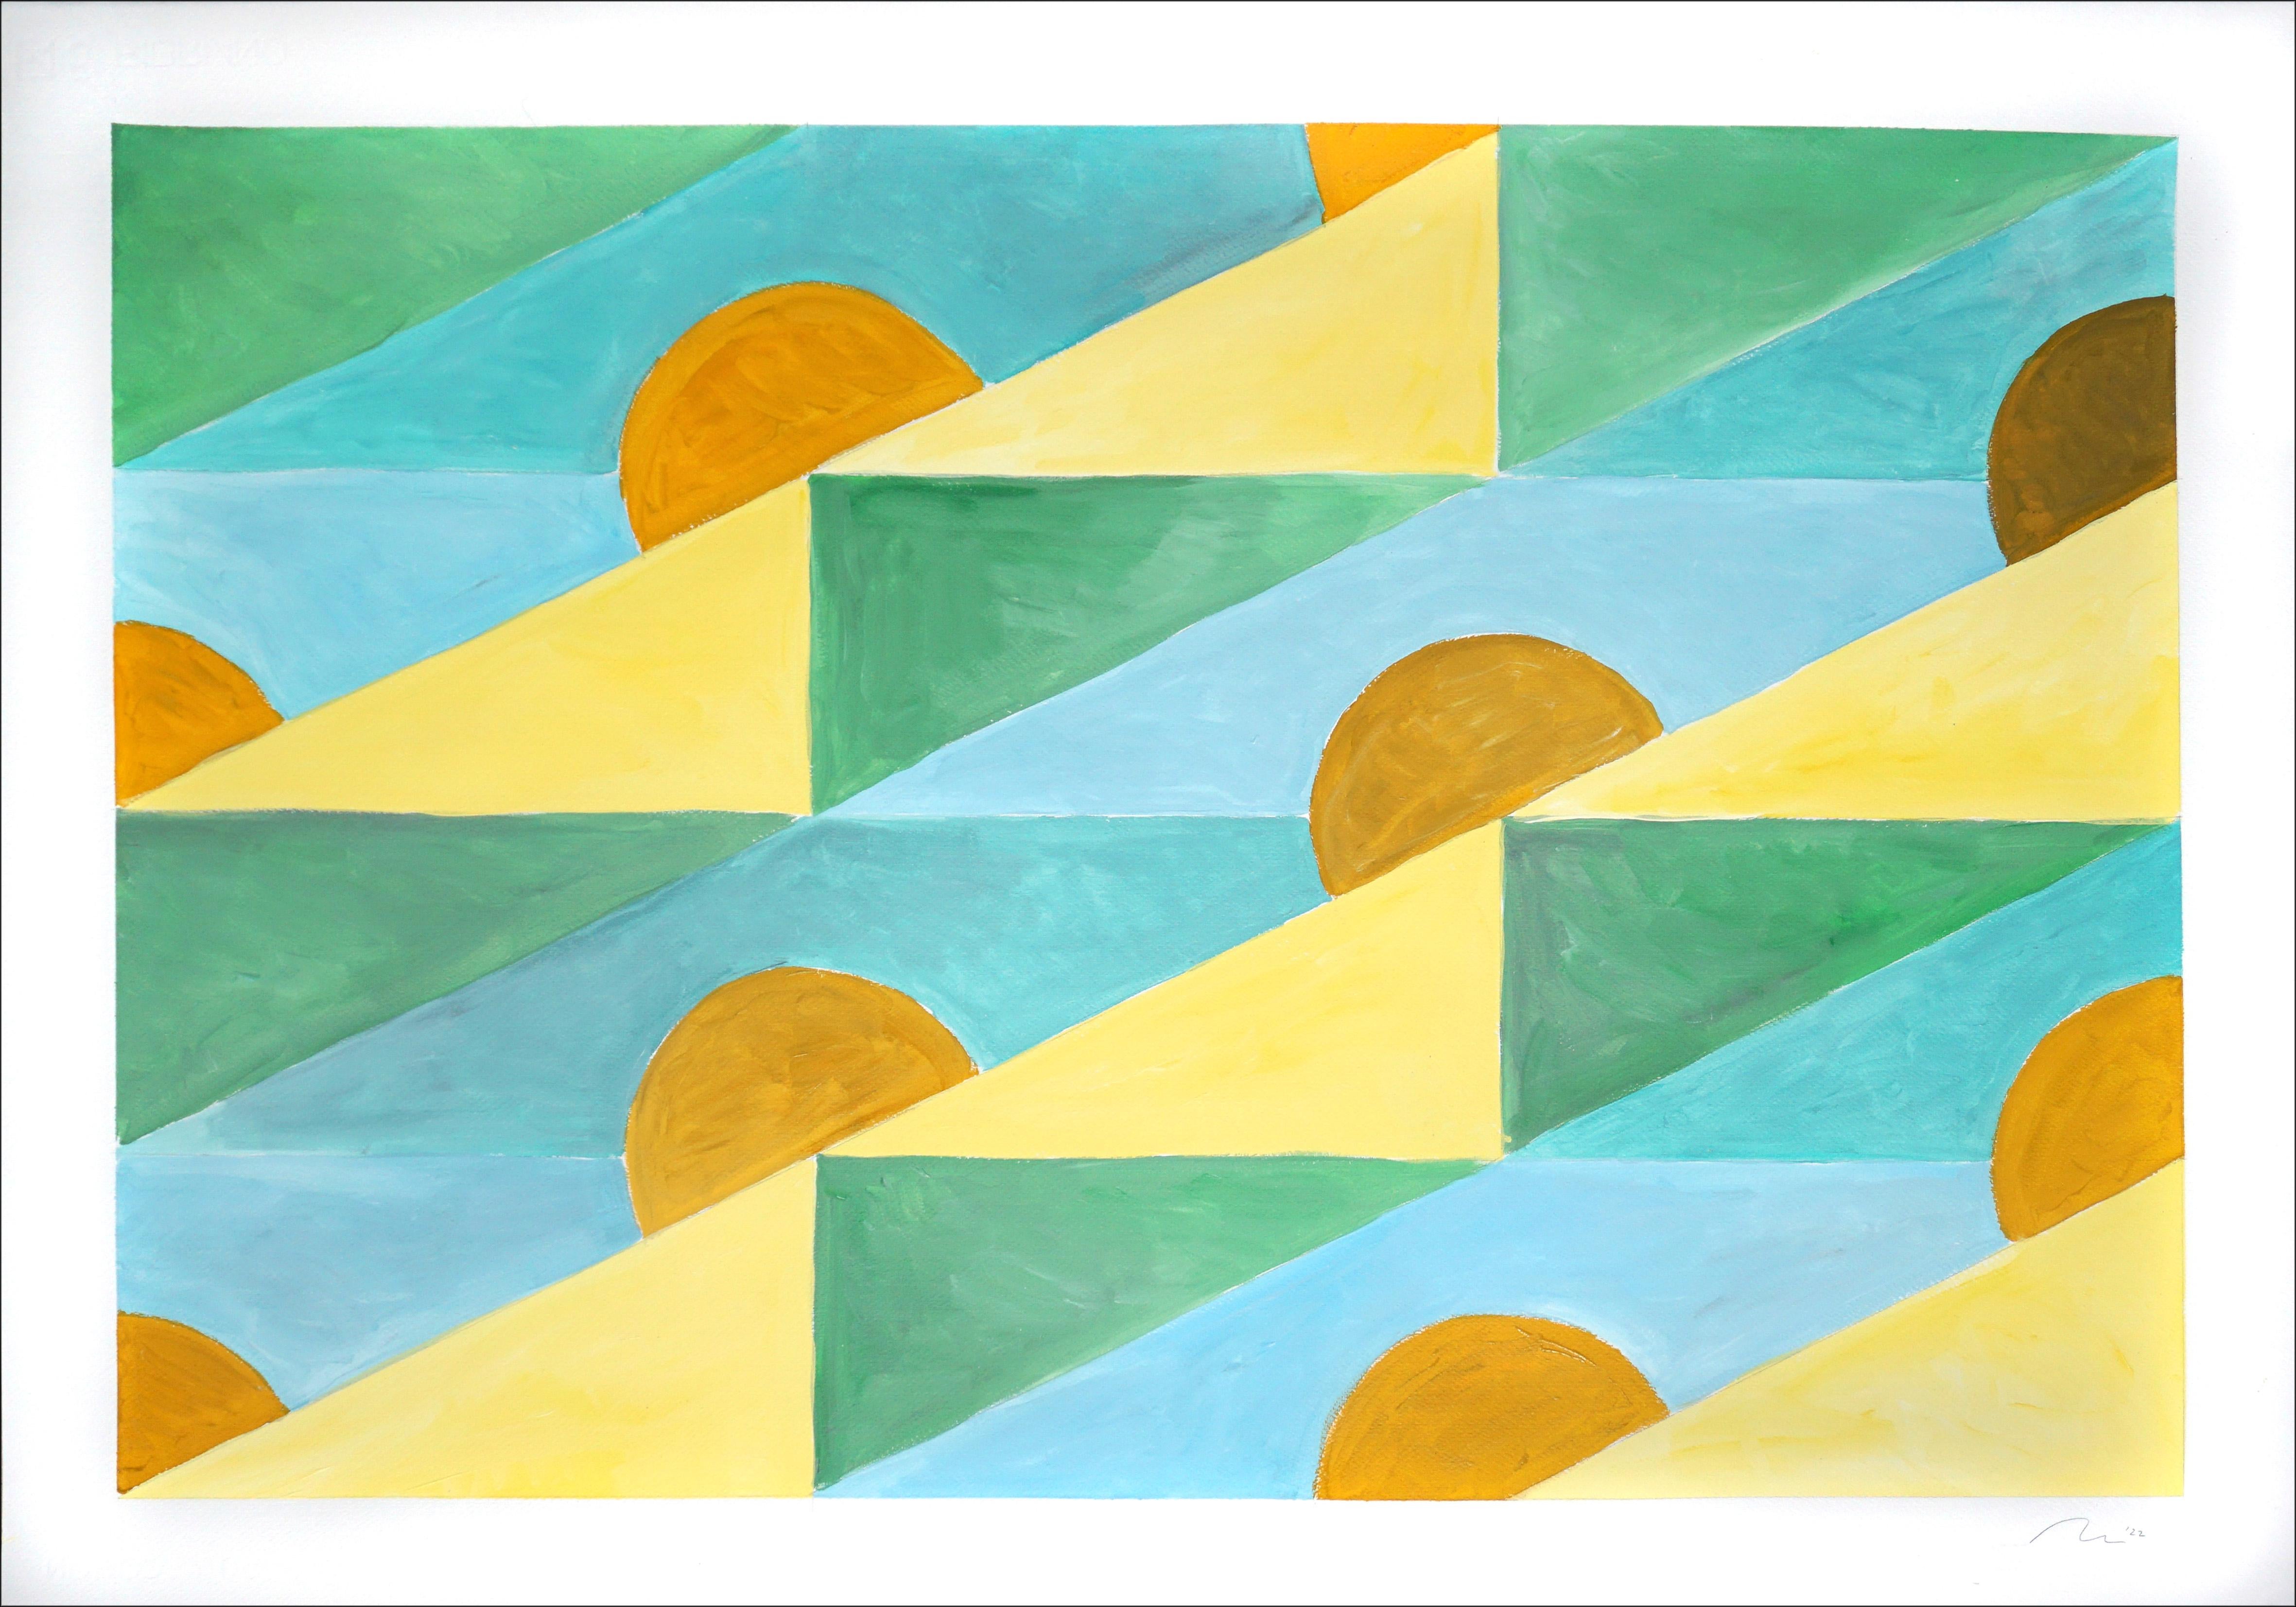 Natalia Roman Abstract Painting - Golden Sunset Beaches, Yellow, Green and Turquoise, Triangles Stairs Light Tones